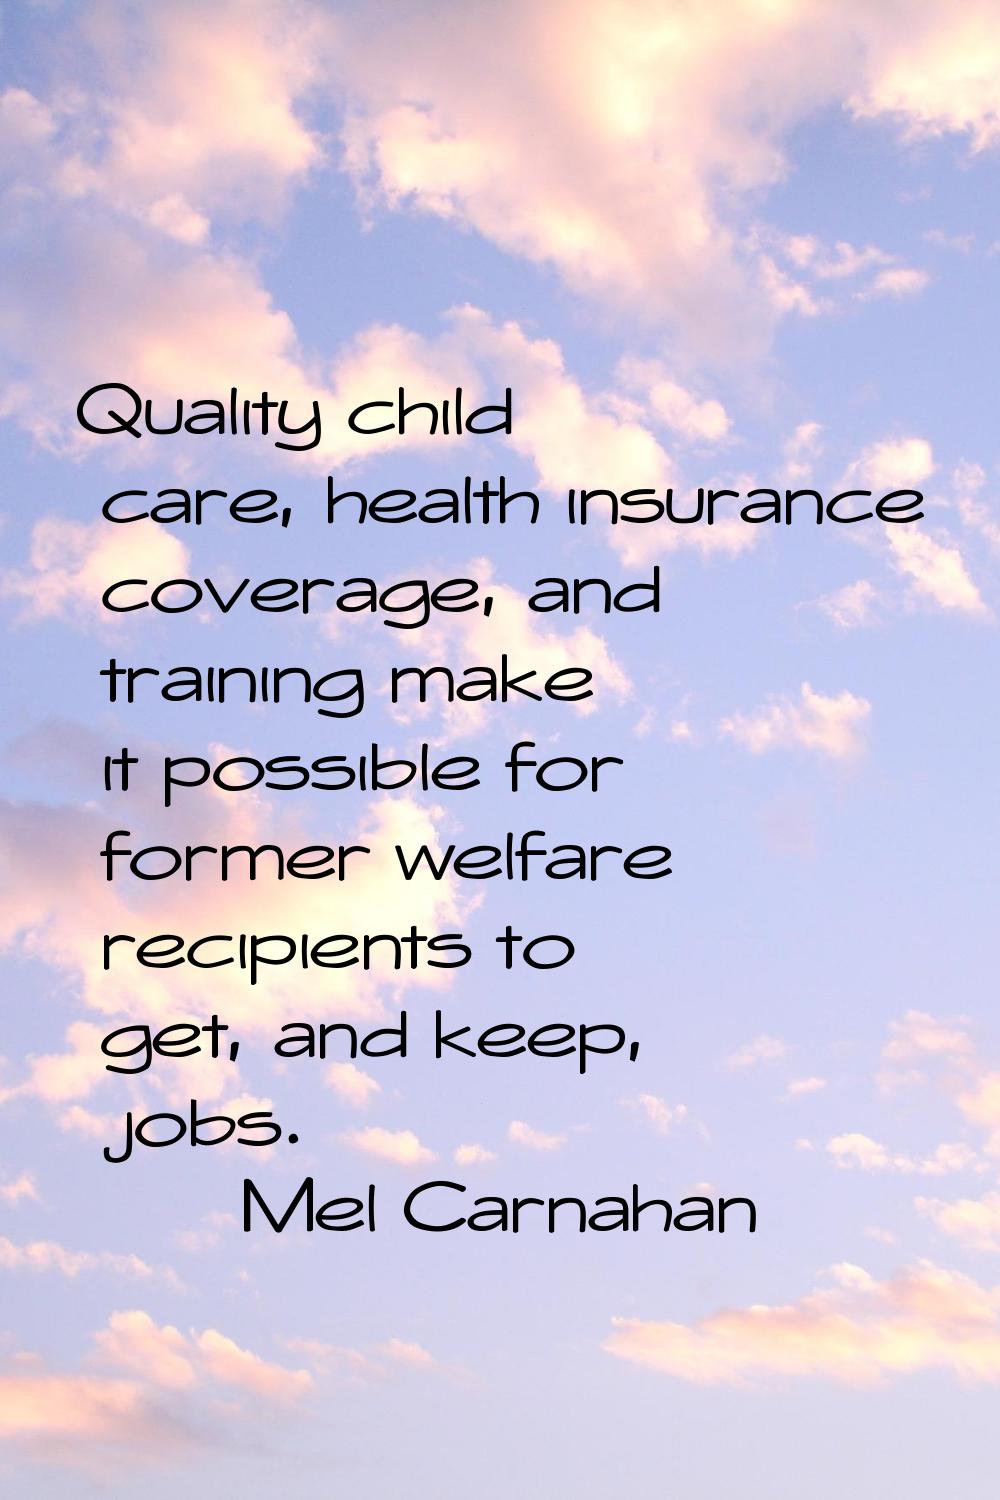 Quality child care, health insurance coverage, and training make it possible for former welfare rec